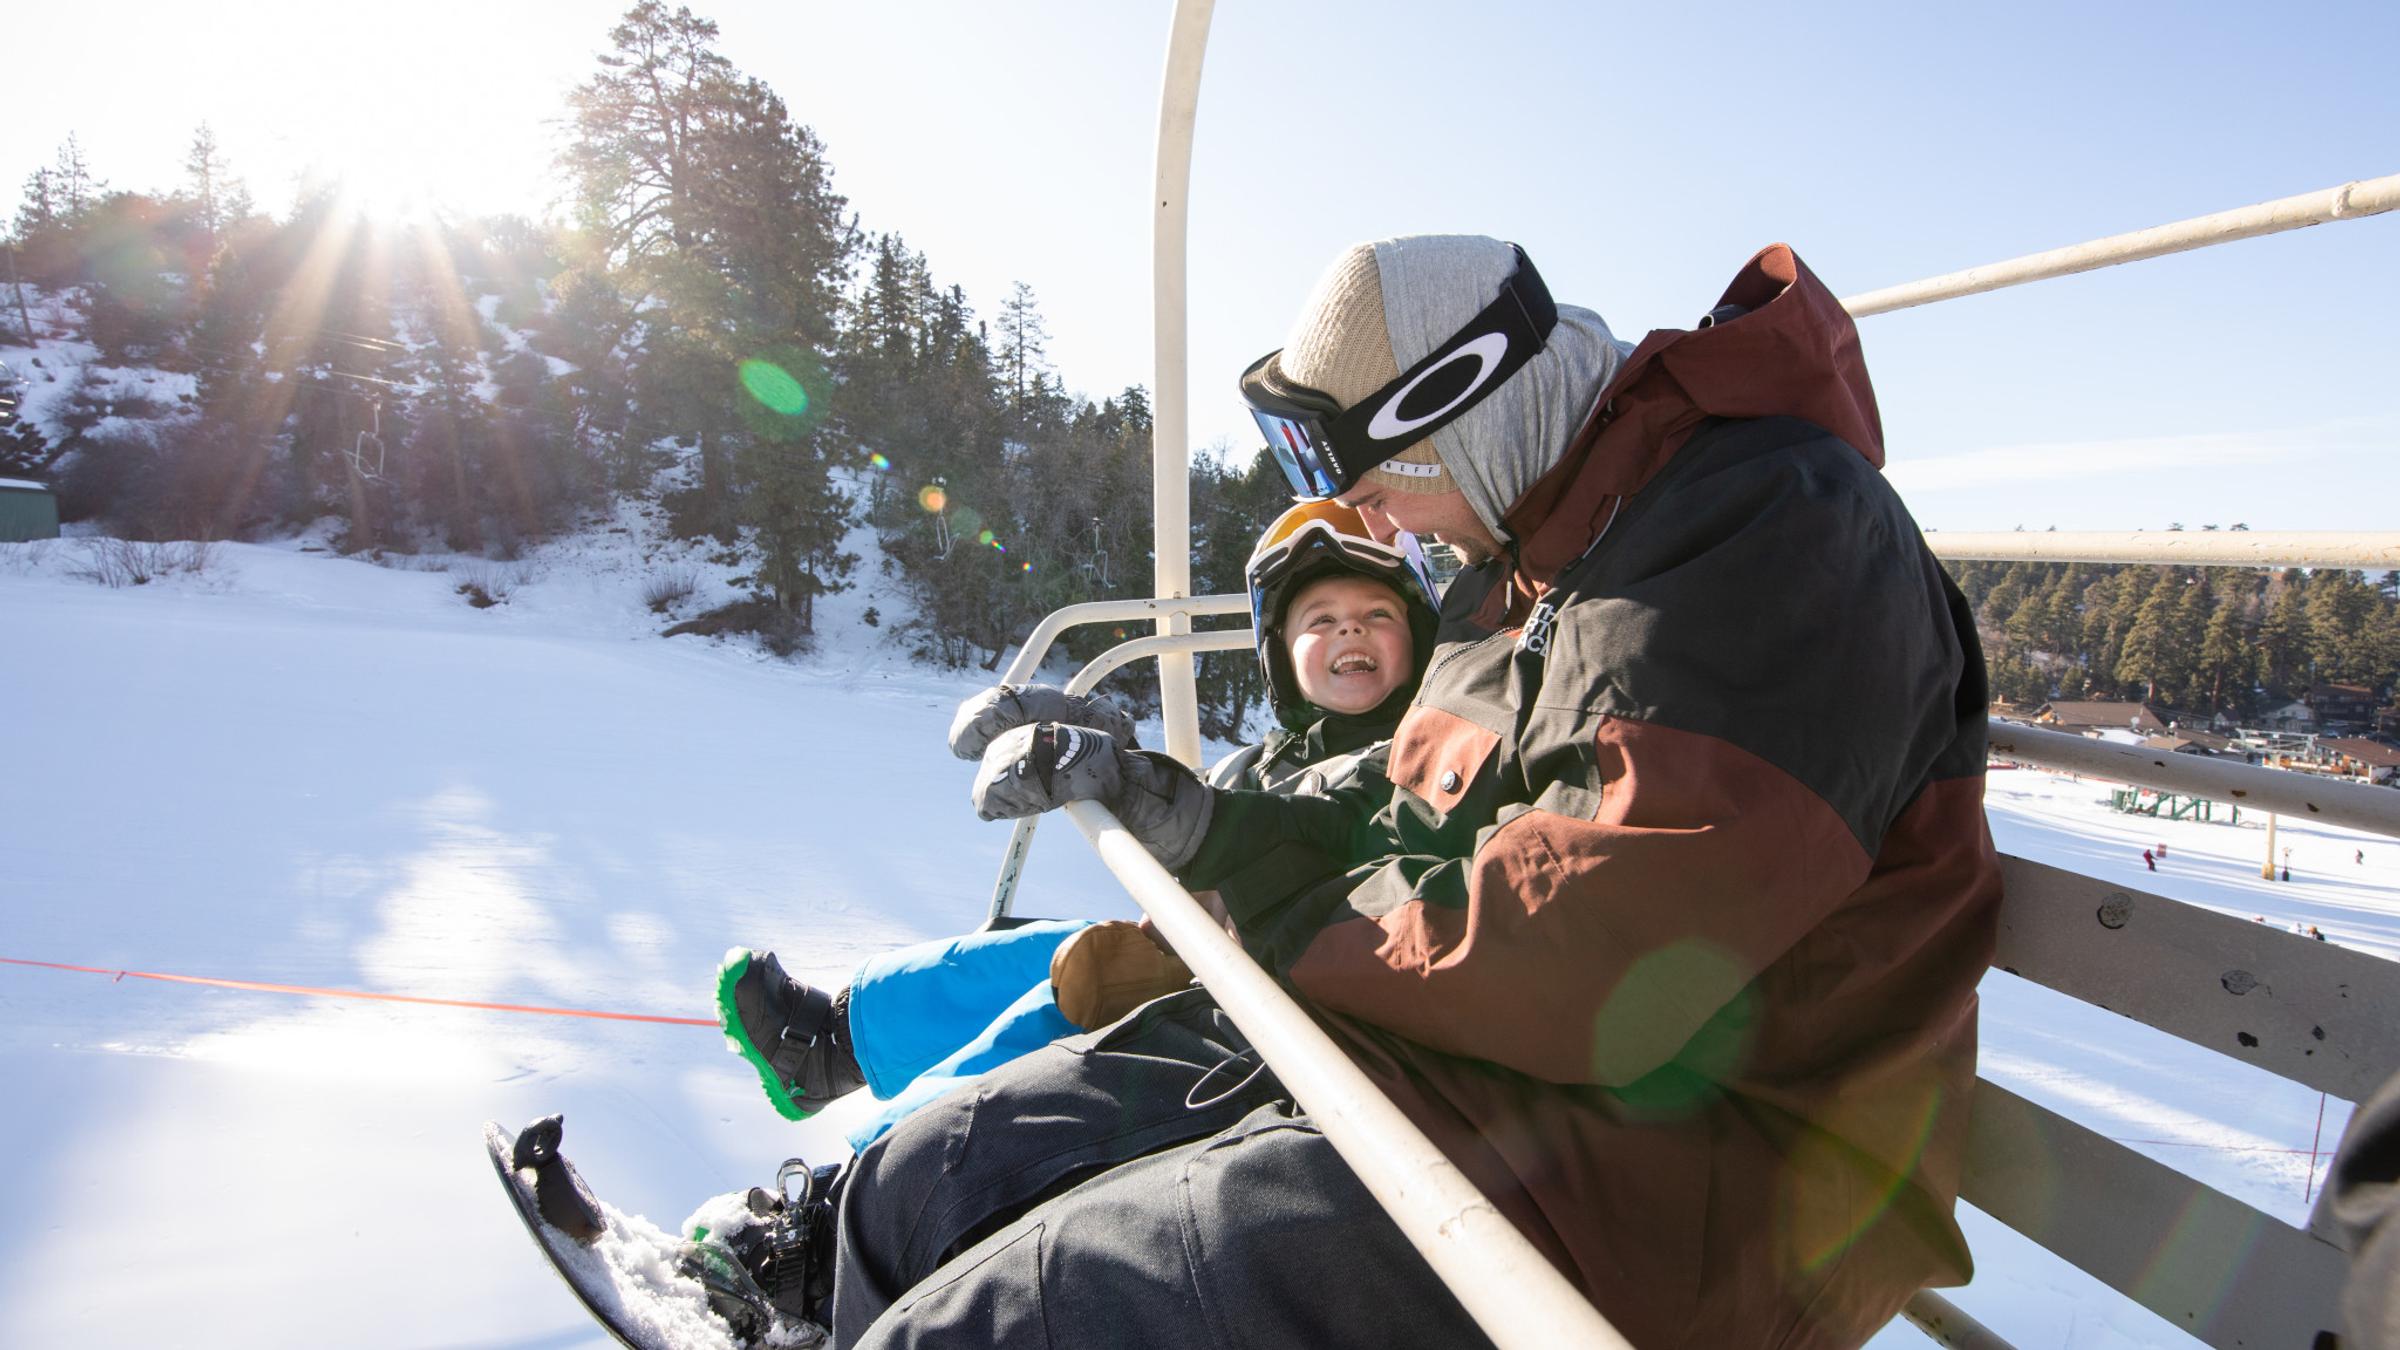 Father and son on a ski lift.